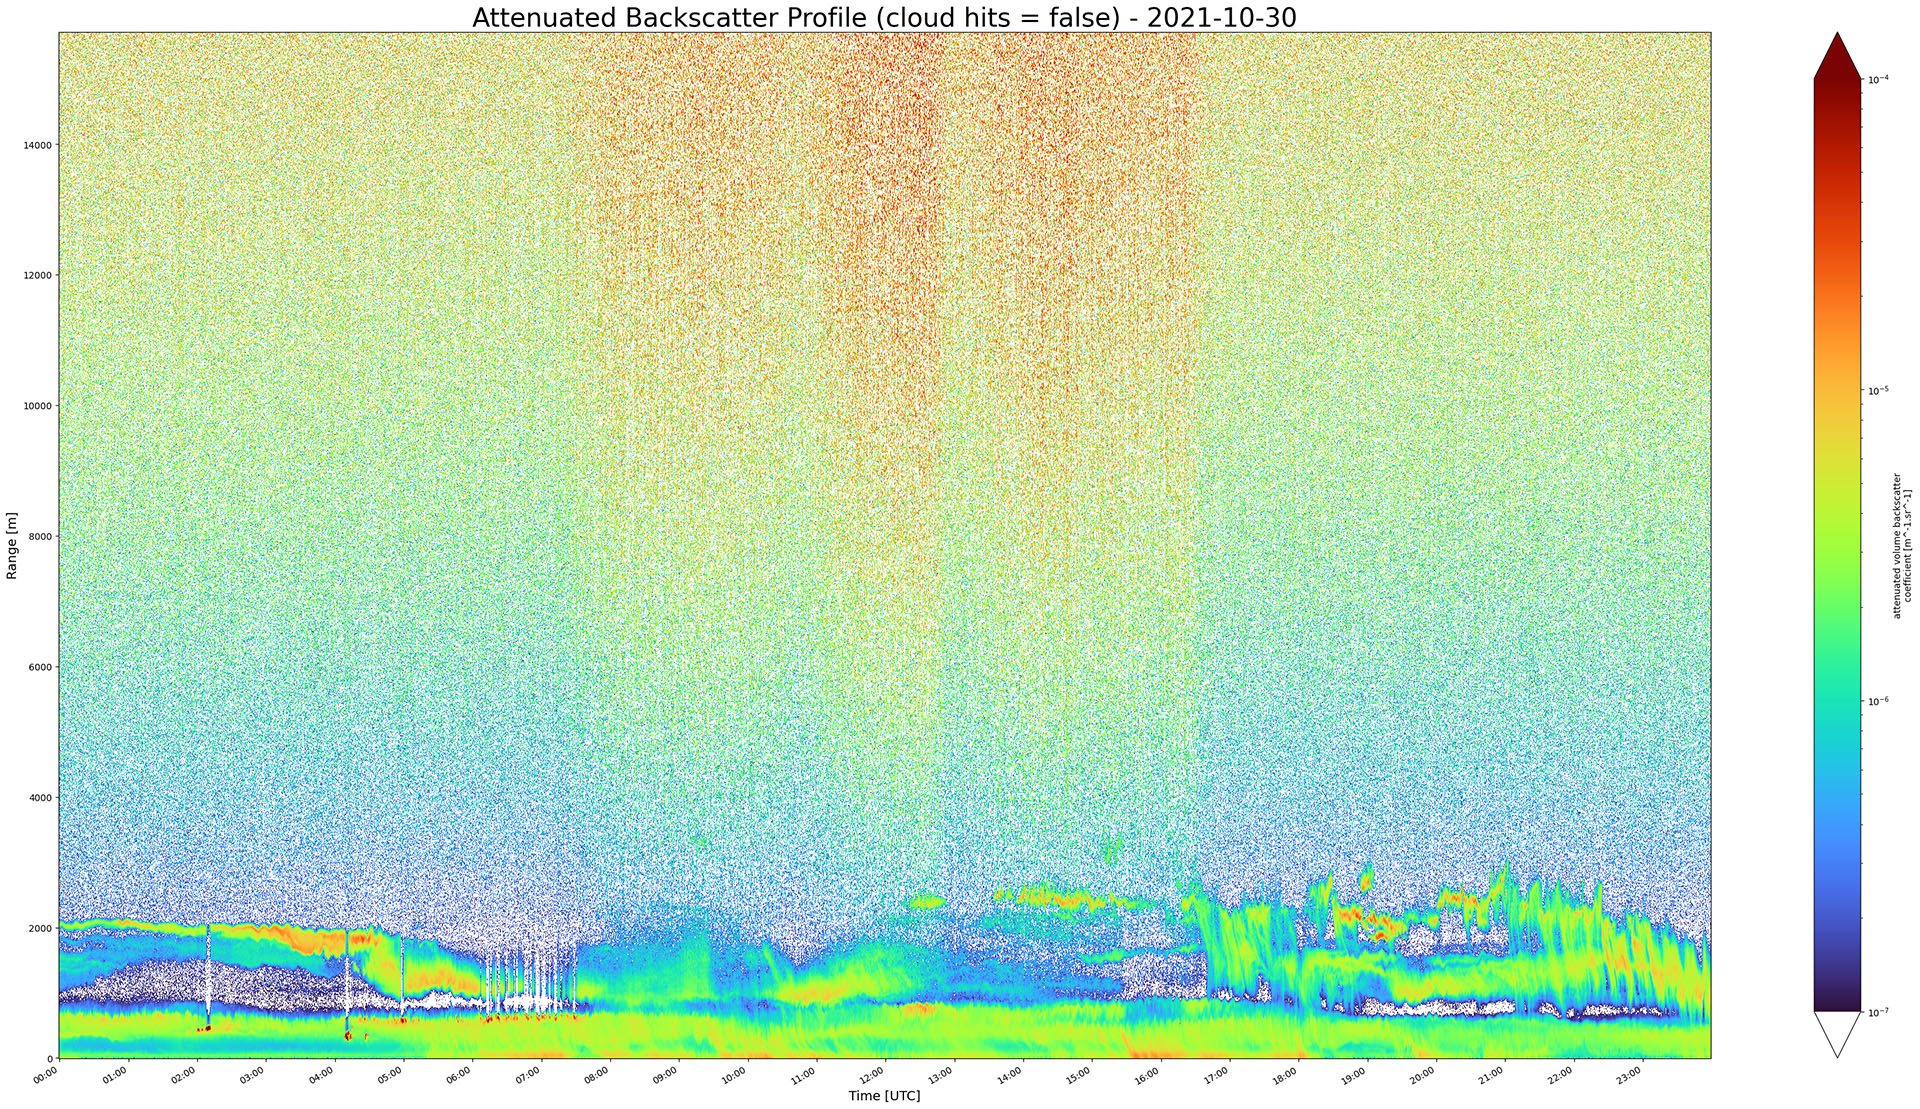 CL61 attenuated backscatter profile on 30-10-2021